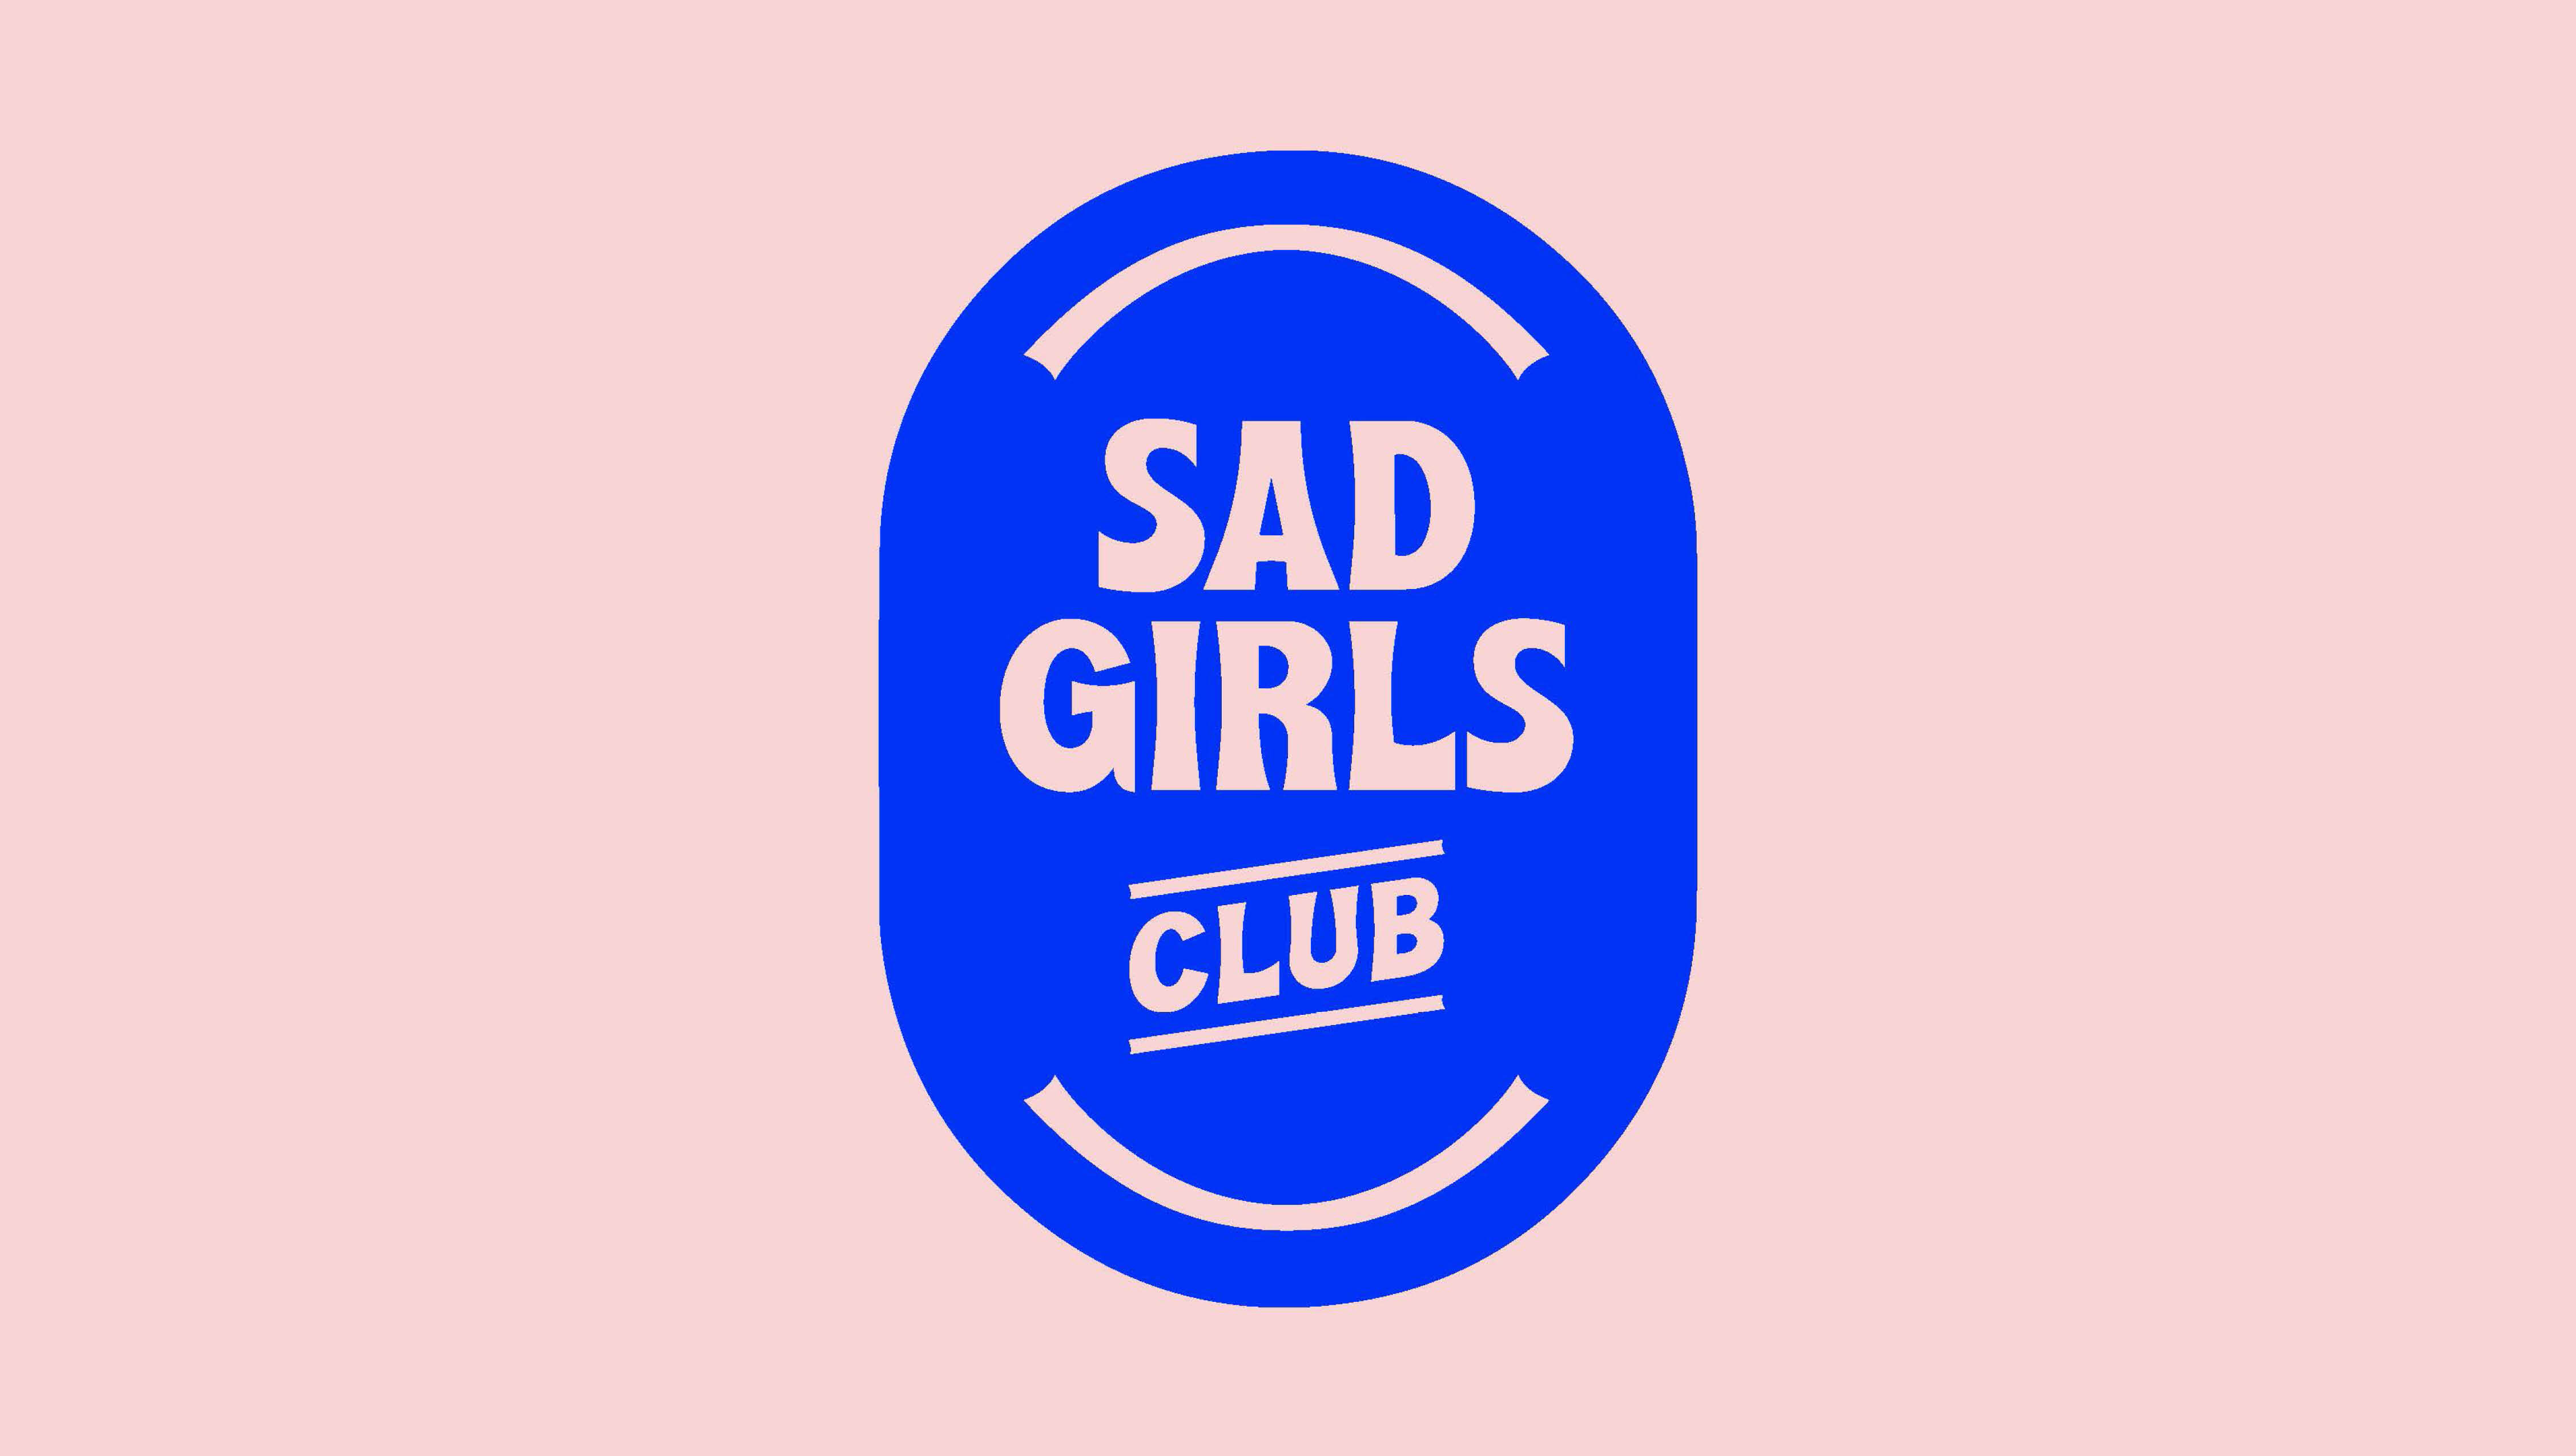 Small Talk Becomes Real Talk for Sad Girls Club with a New Brand Identity by Tickety Boo Creative